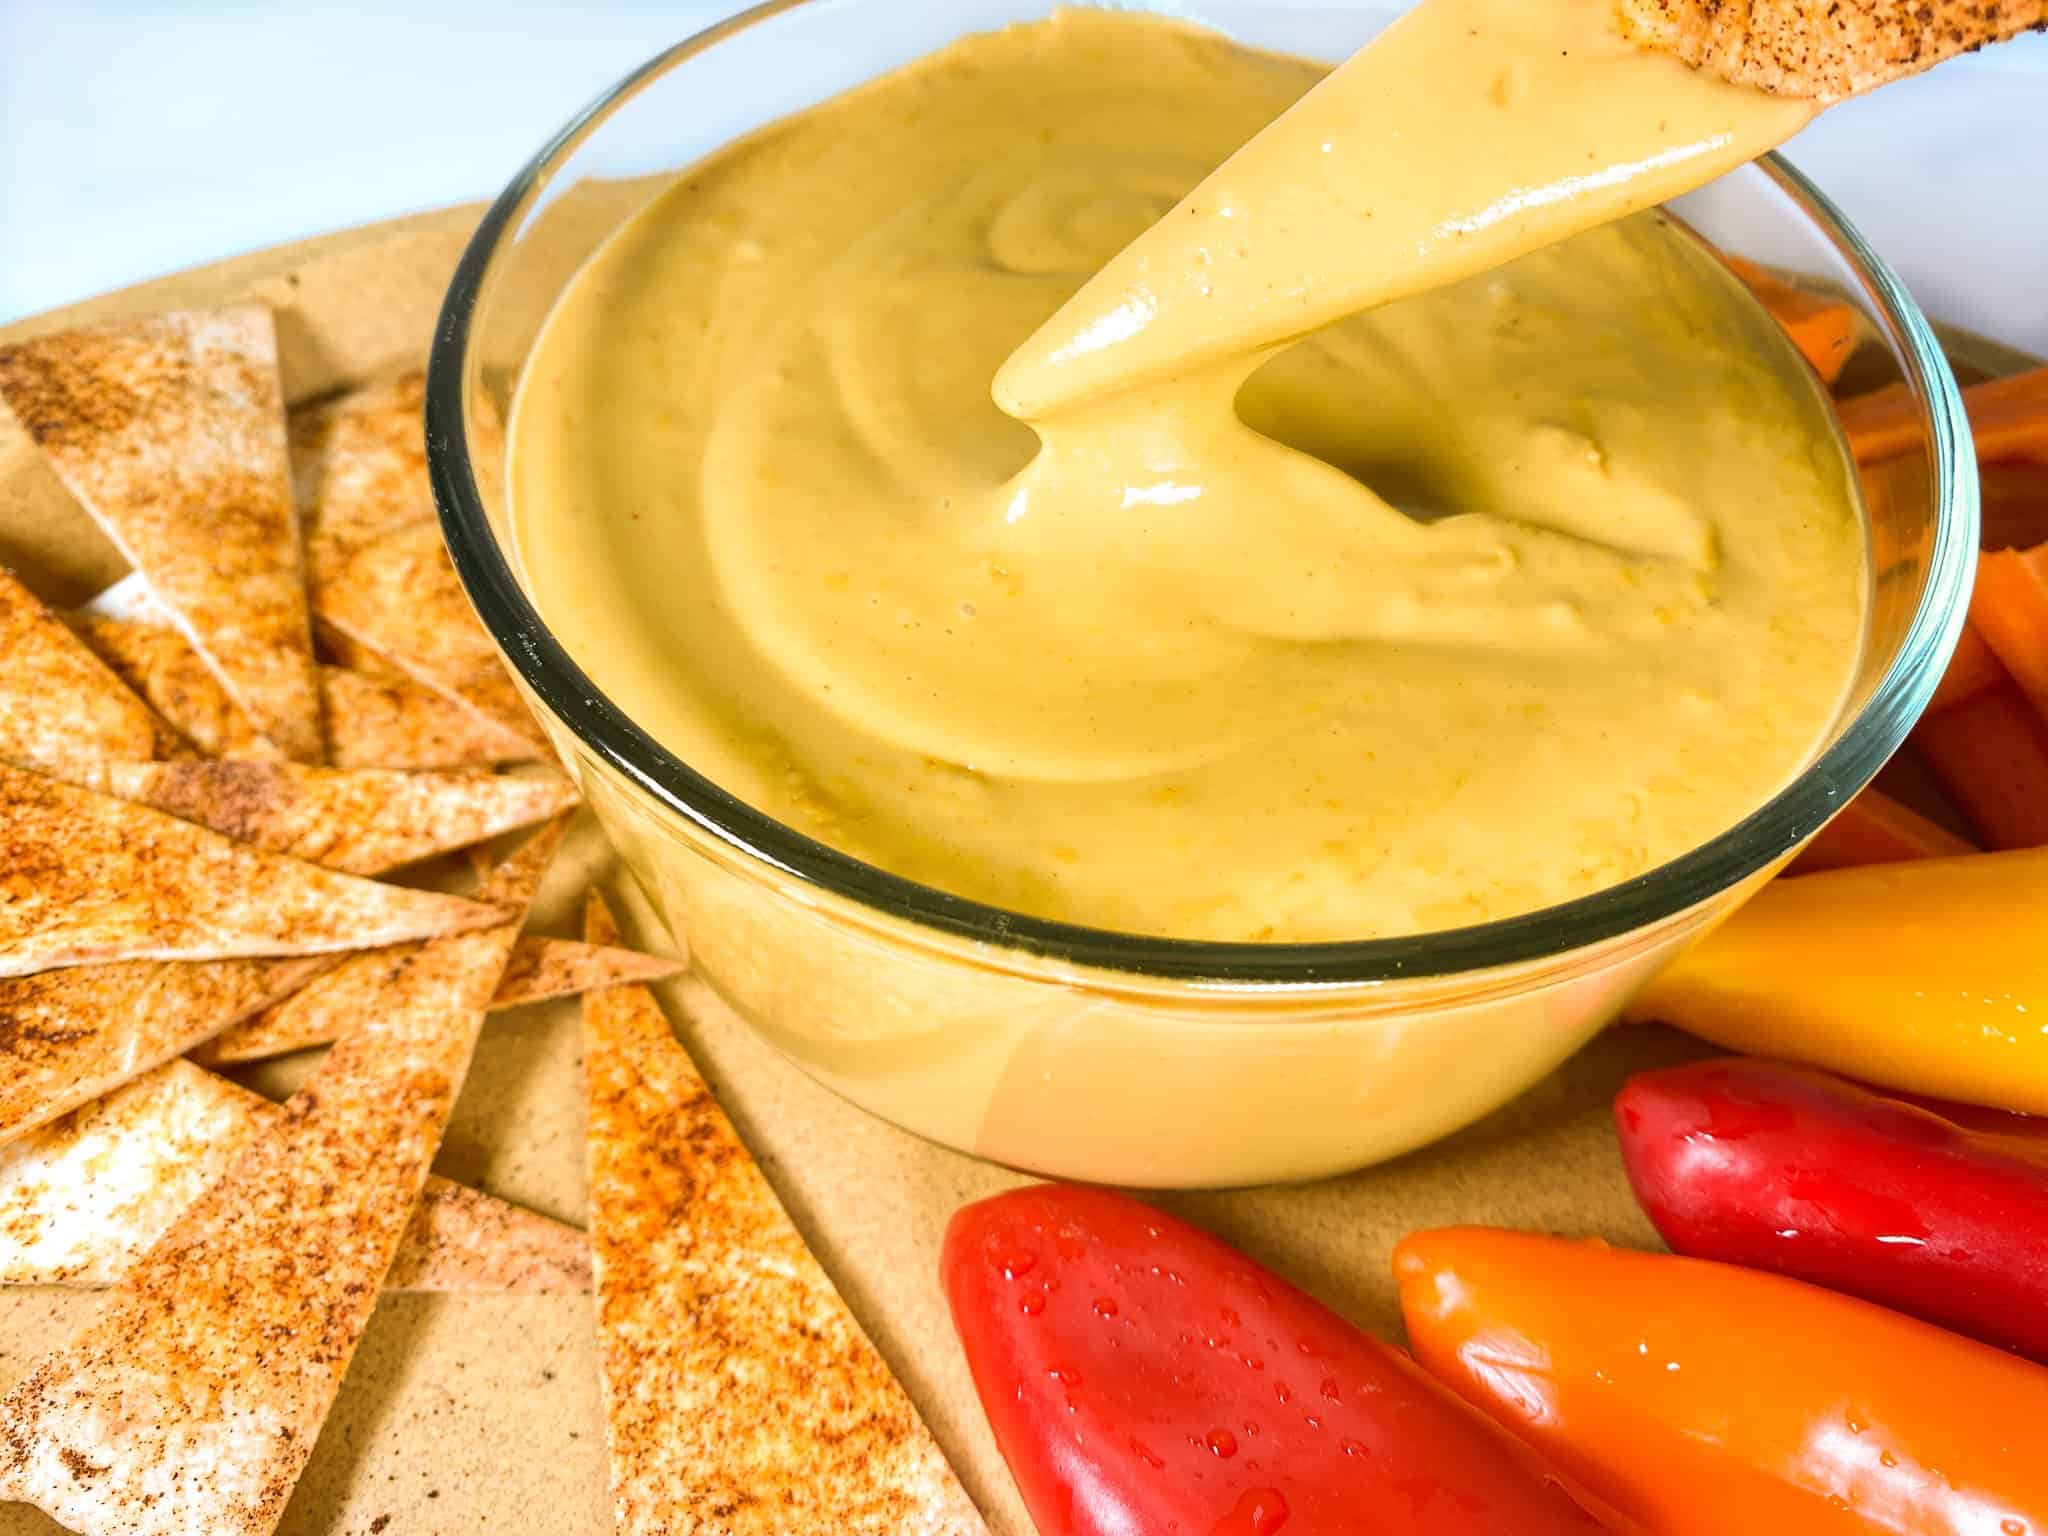 Dipping chip in cheese sauce.